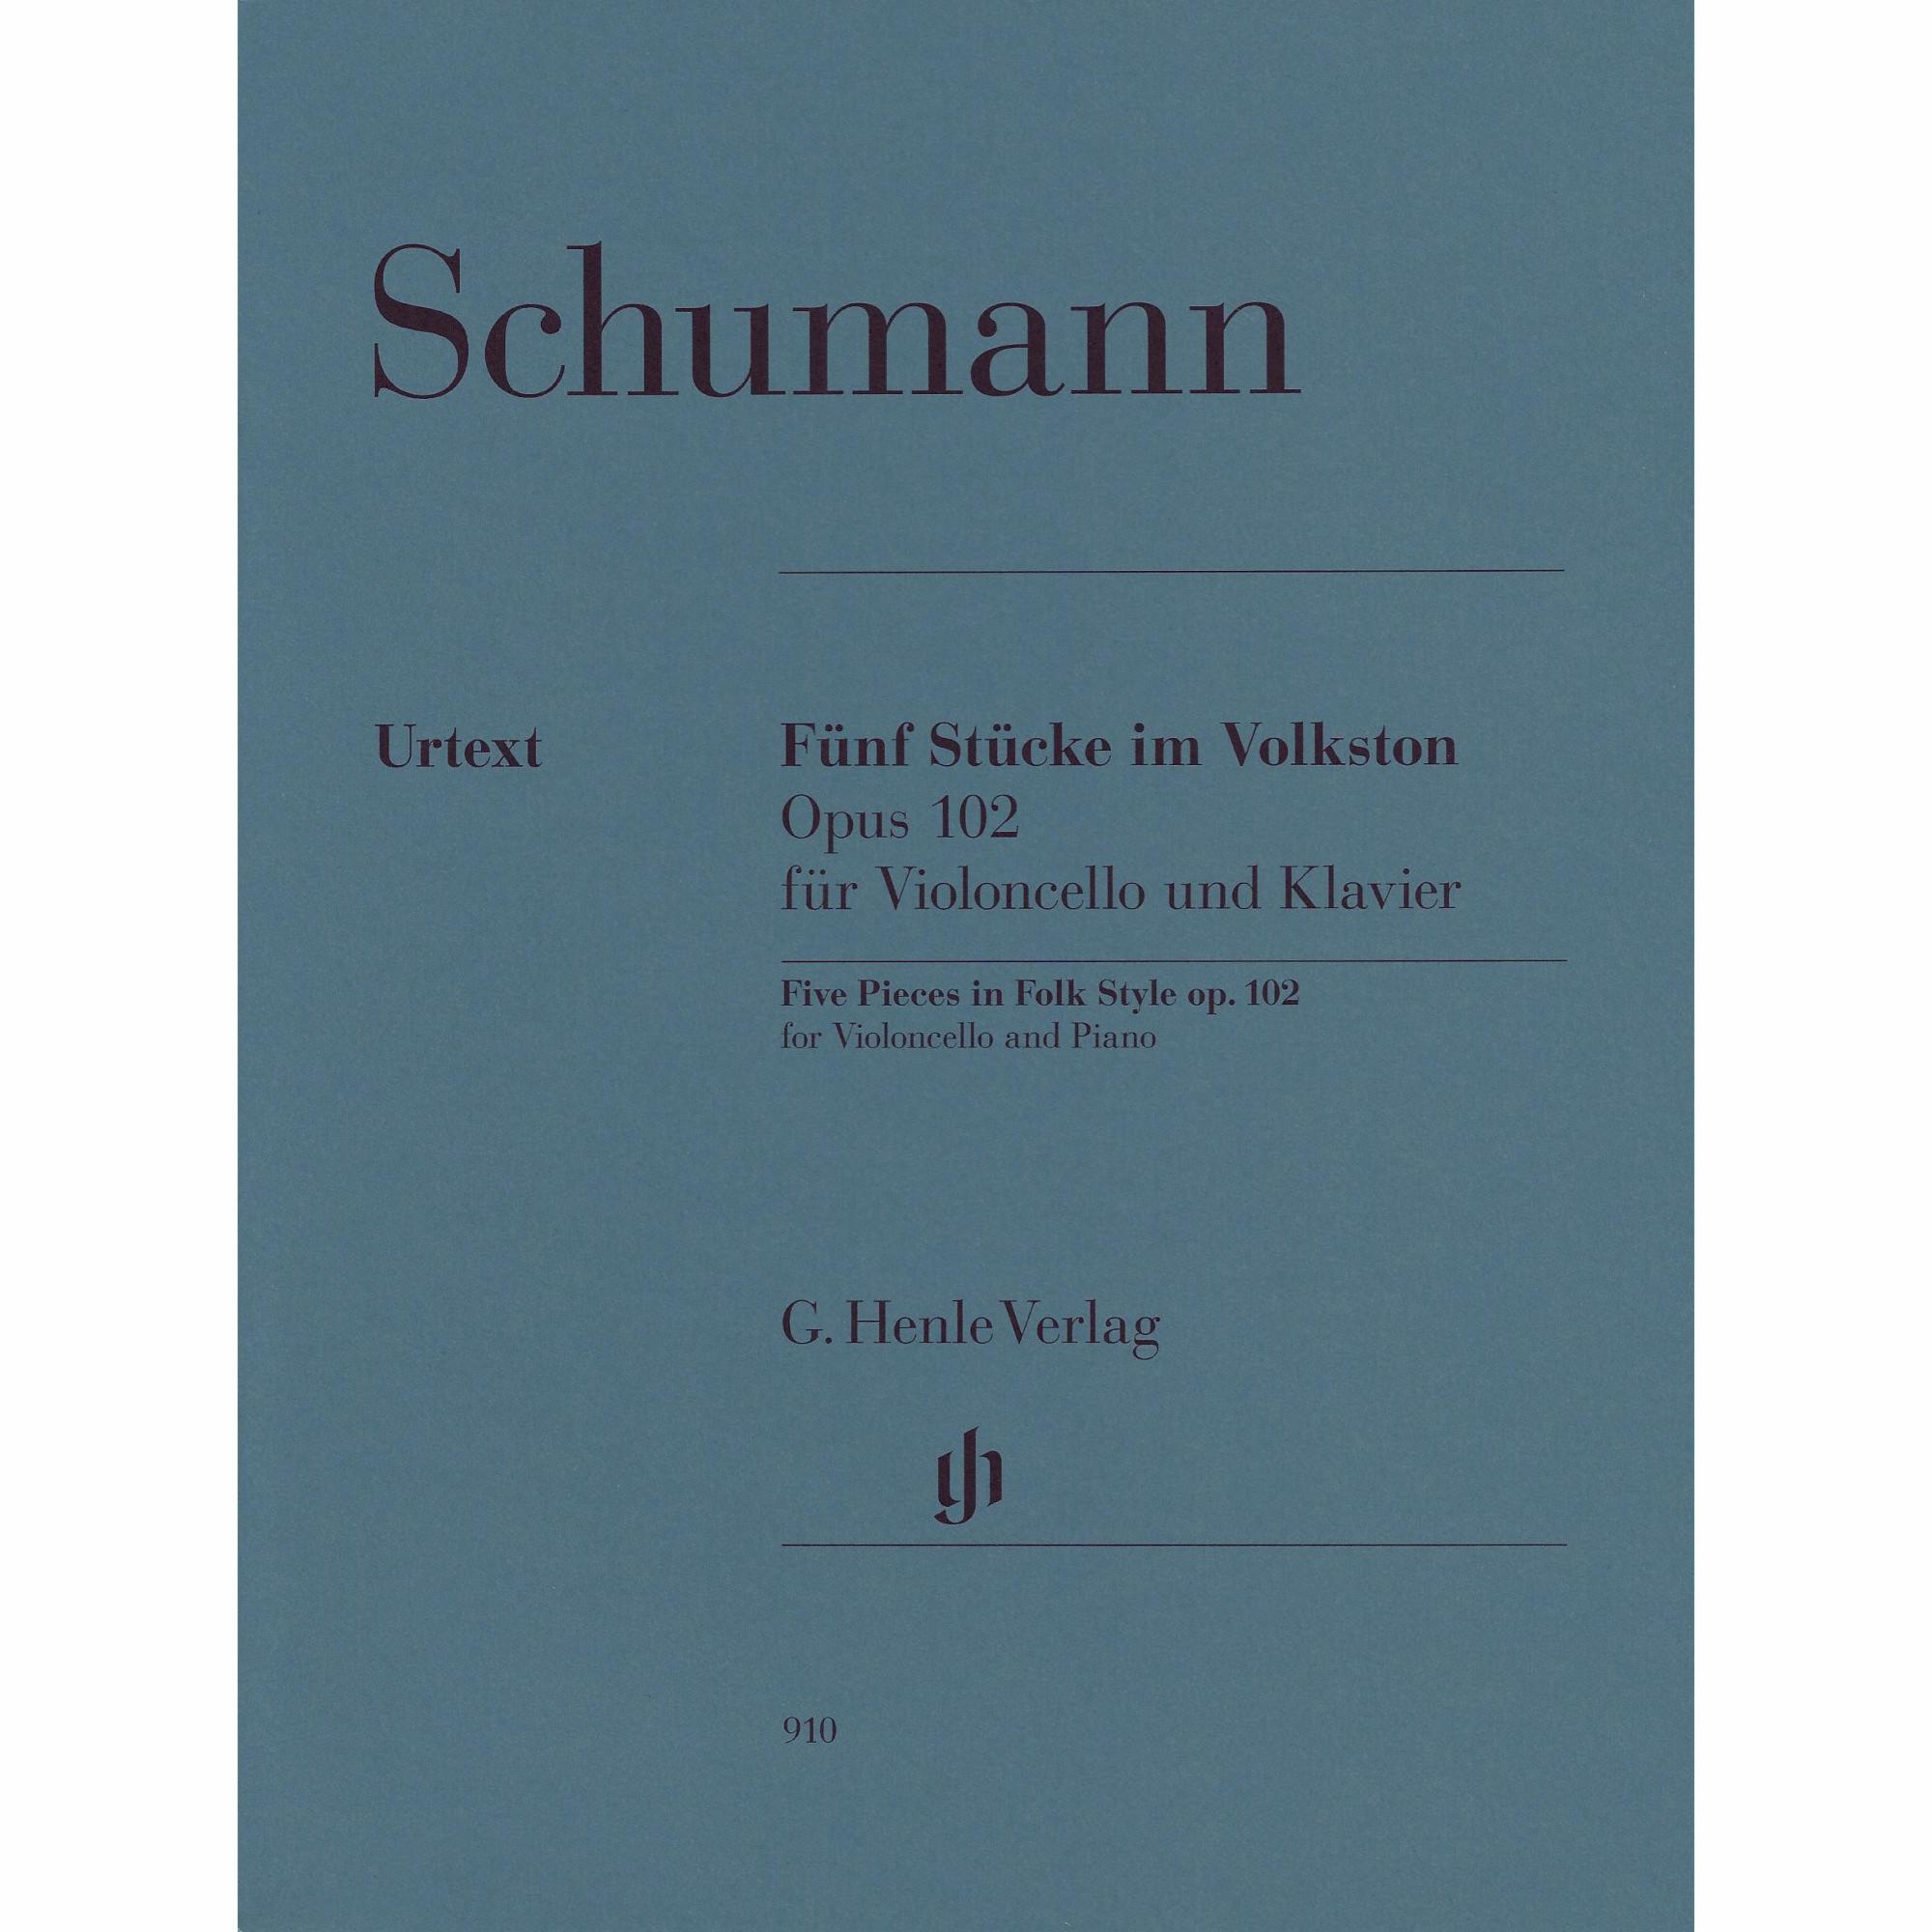 Schumann -- Five Pieces in Folk Style, Op. 102 for Cello and Piano